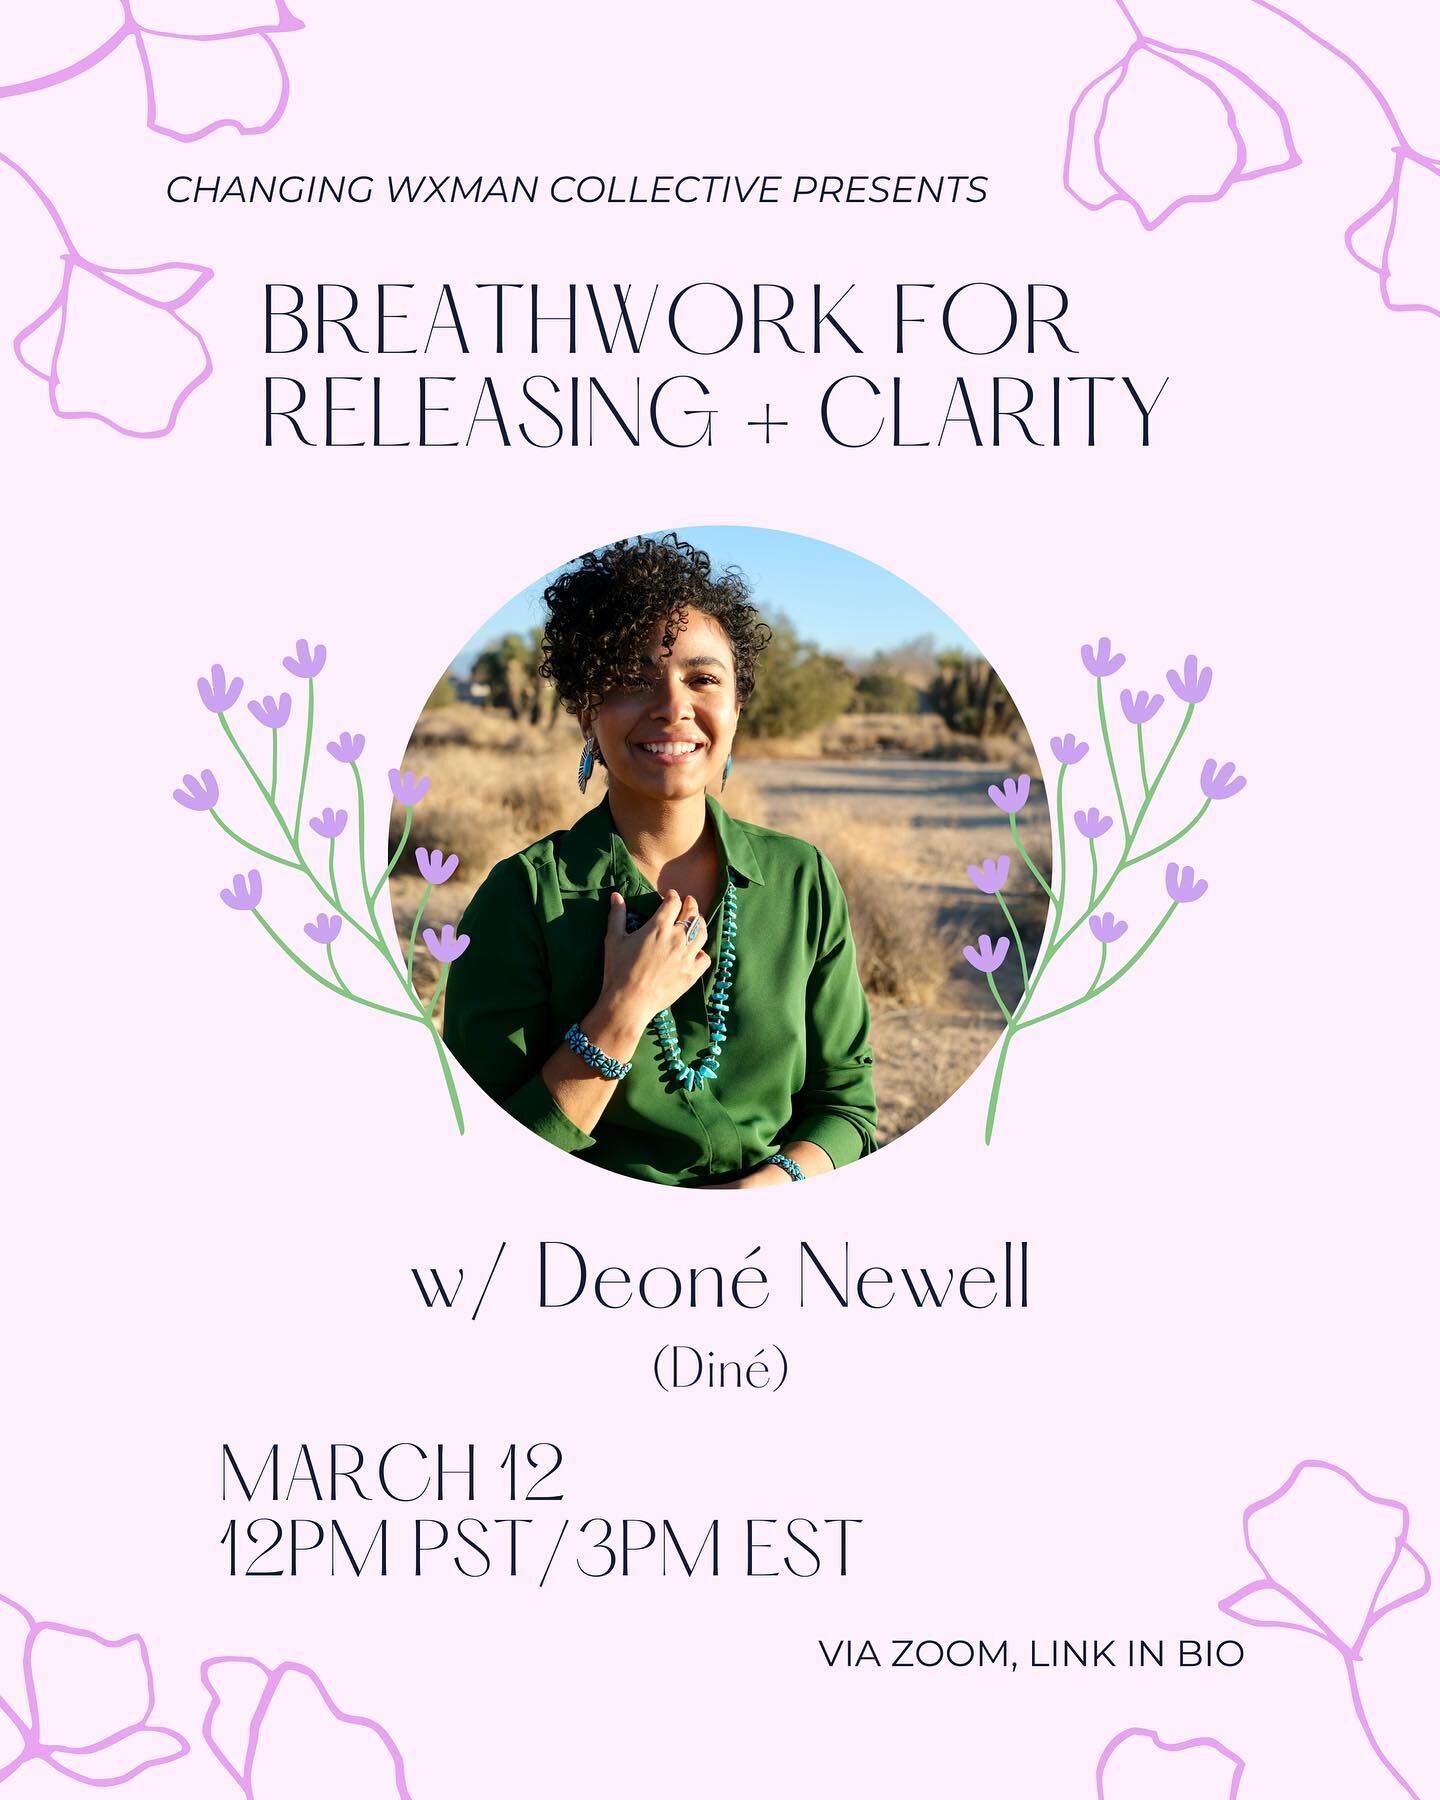 Join Deon&eacute; Newell this Saturday for Breathwork for Releasing and Clarity!

Both therapeutically and as a path of spiritual awakening, Breathwork has been used in ancient traditions for thousands of years. Breathwork allows us to experience a s